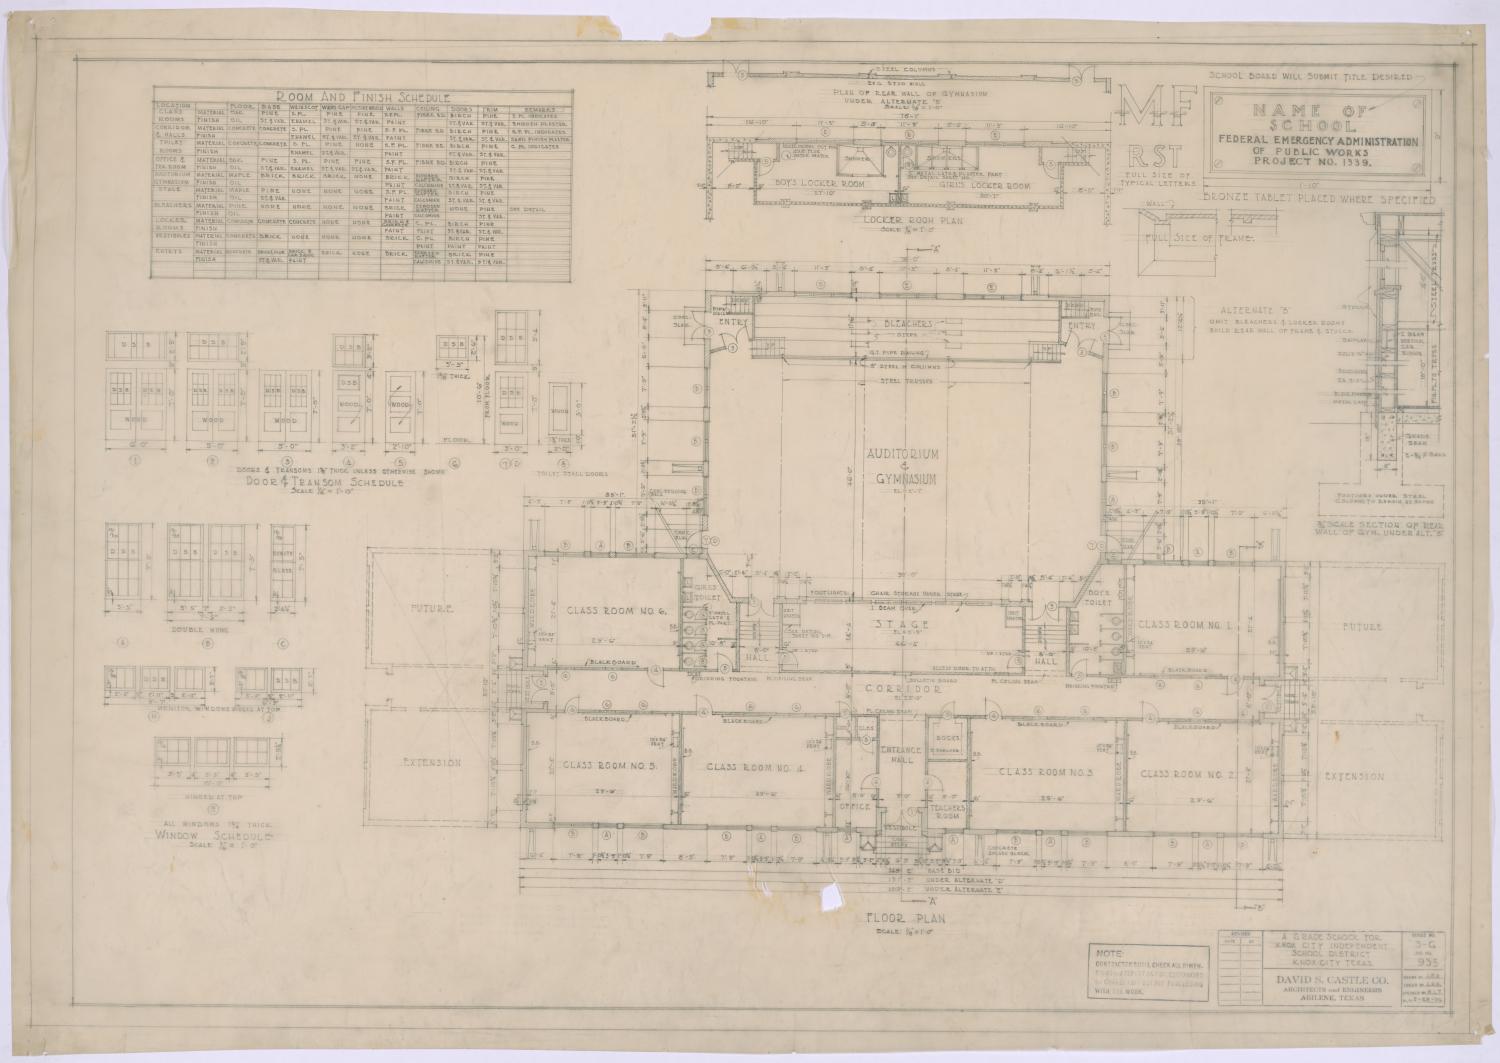 grade-school-knox-city-texas-floor-plan-and-schedules-the-portal-to-texas-history